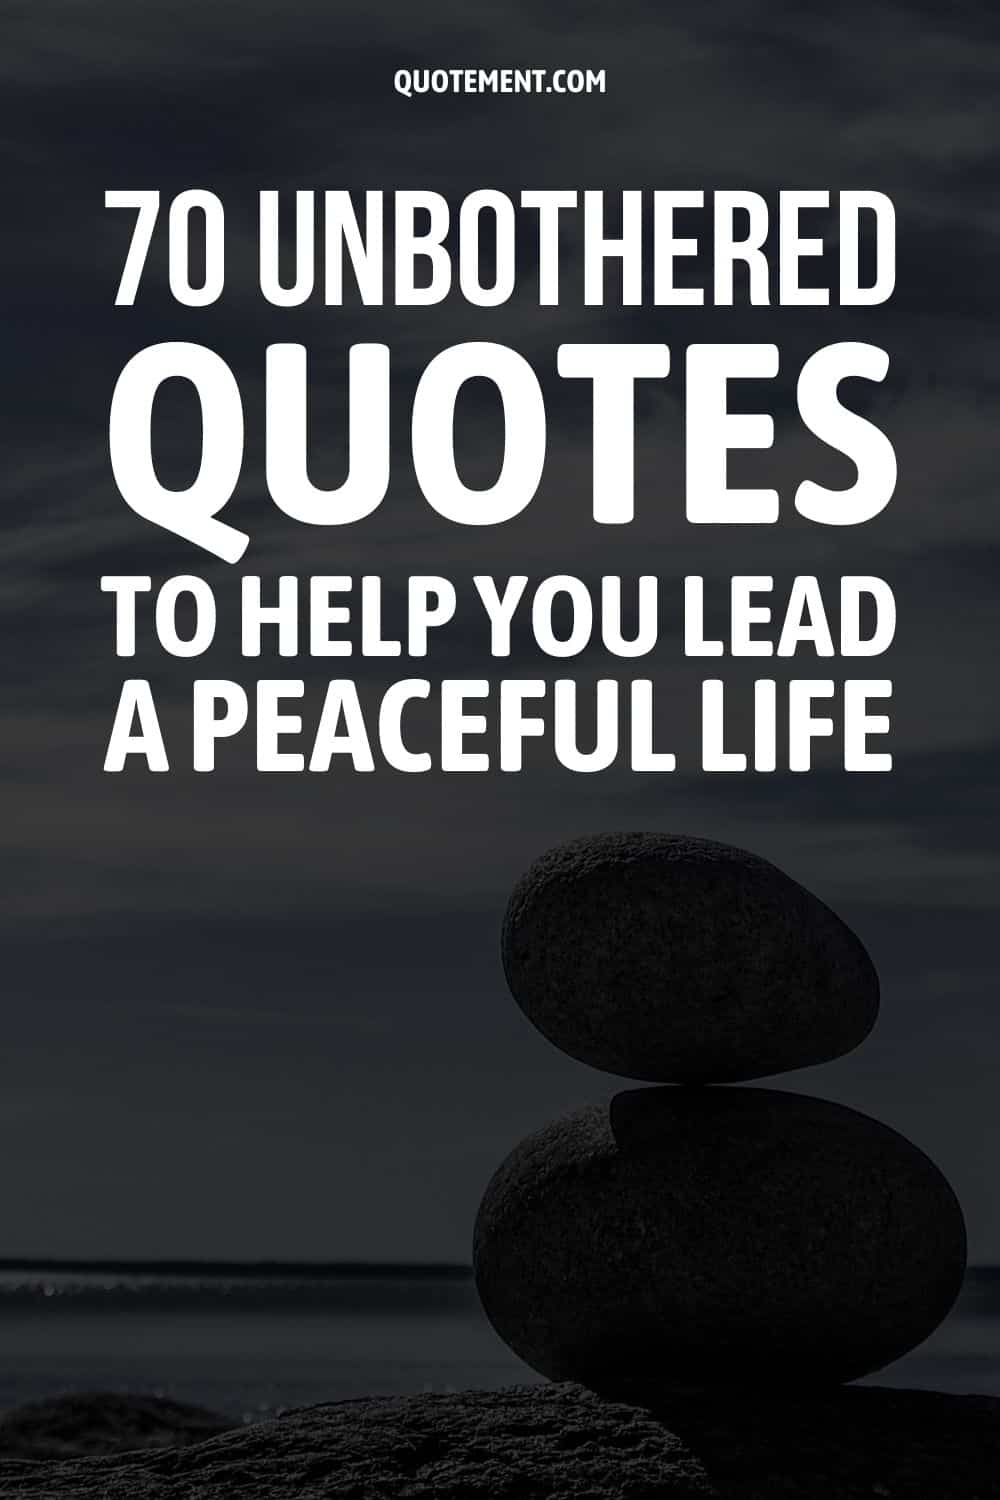 70 Unbothered Quotes To Help You Lead A Peaceful Life